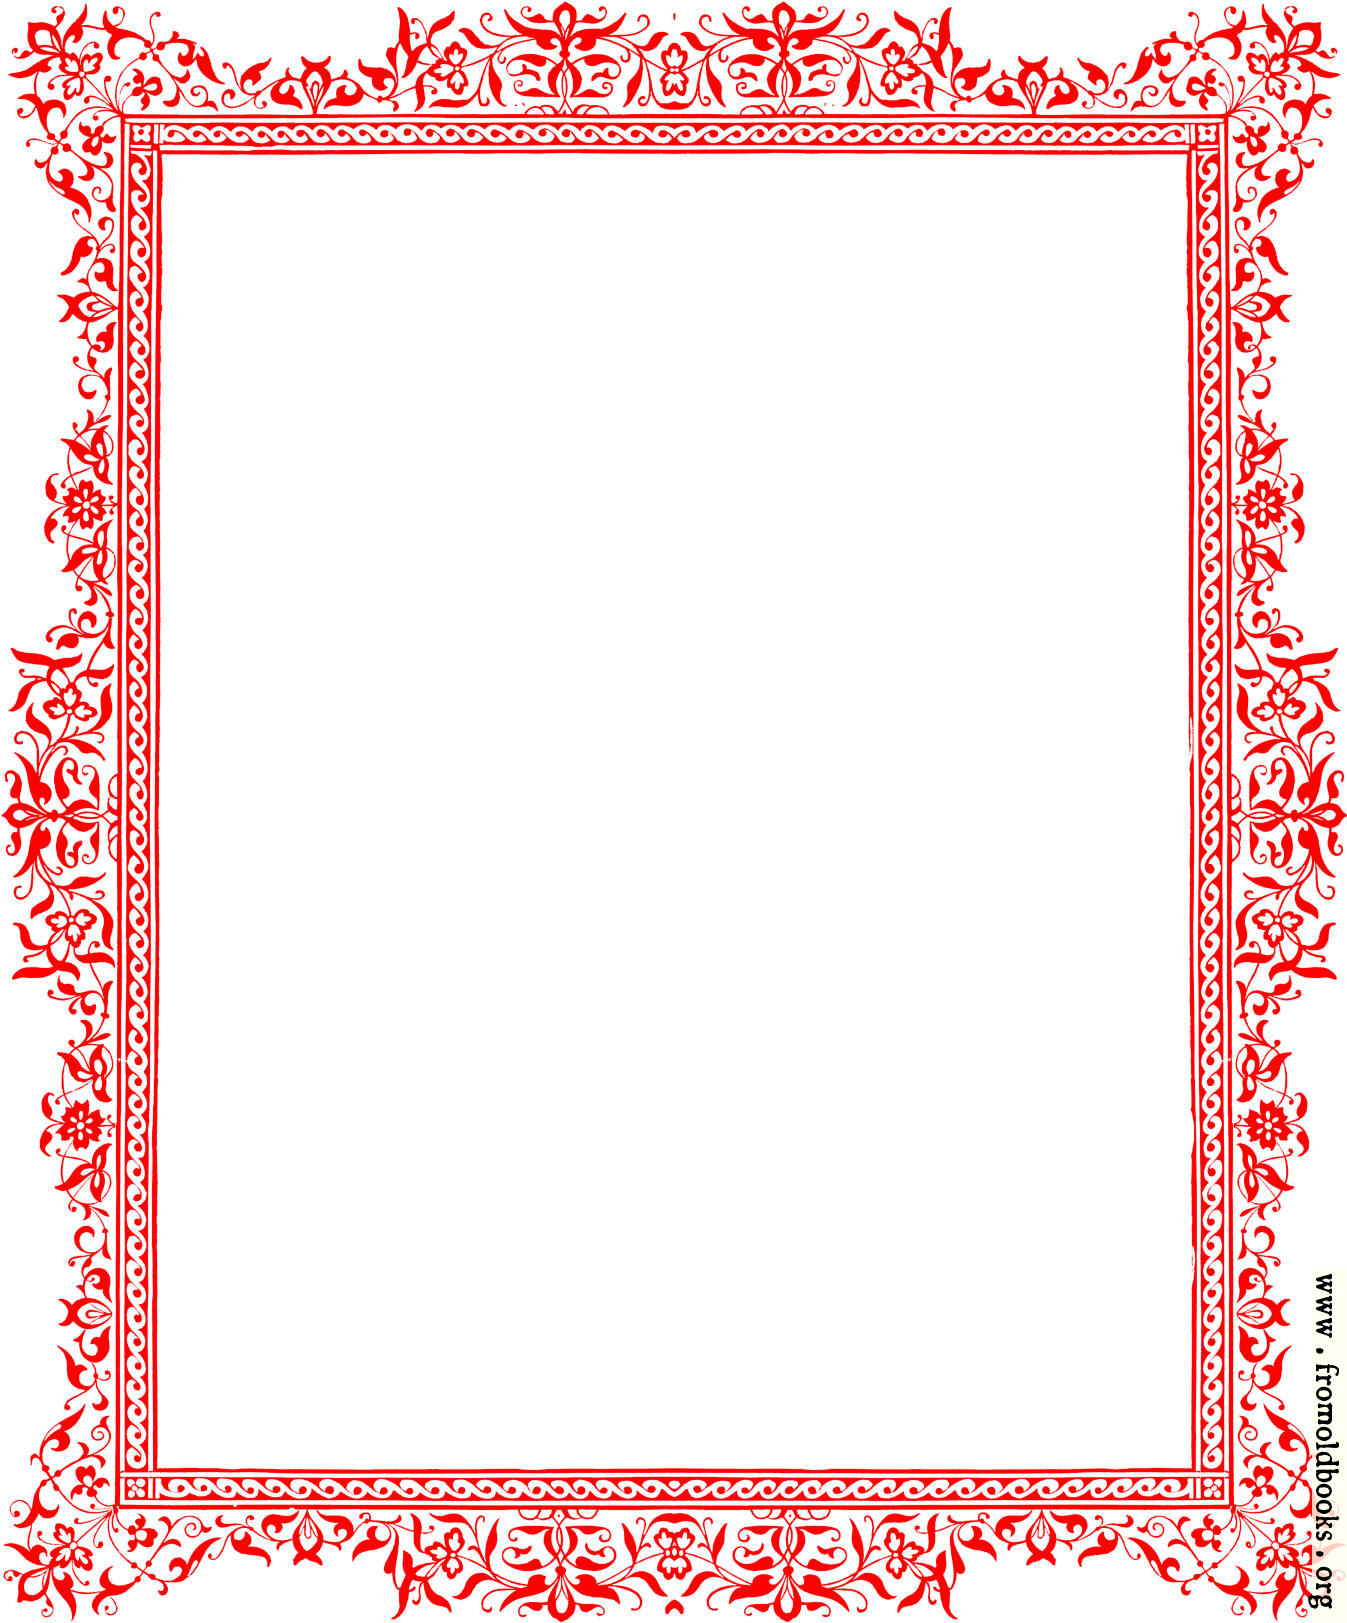 Red border from Page 27